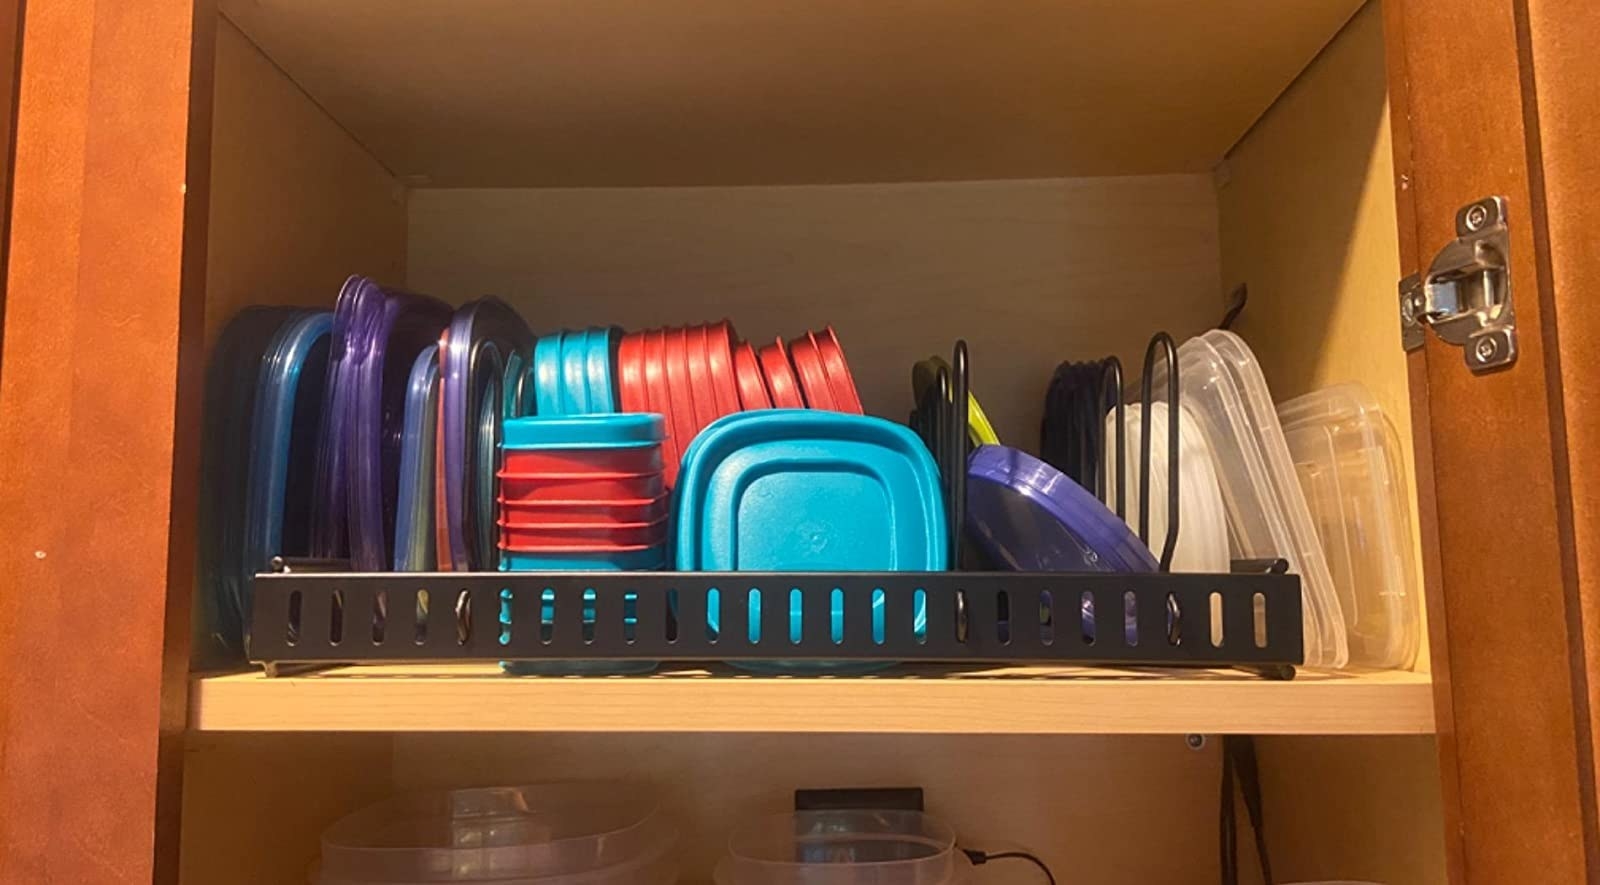 The Tupperware organizer storing several containers and their lids in a cabinet